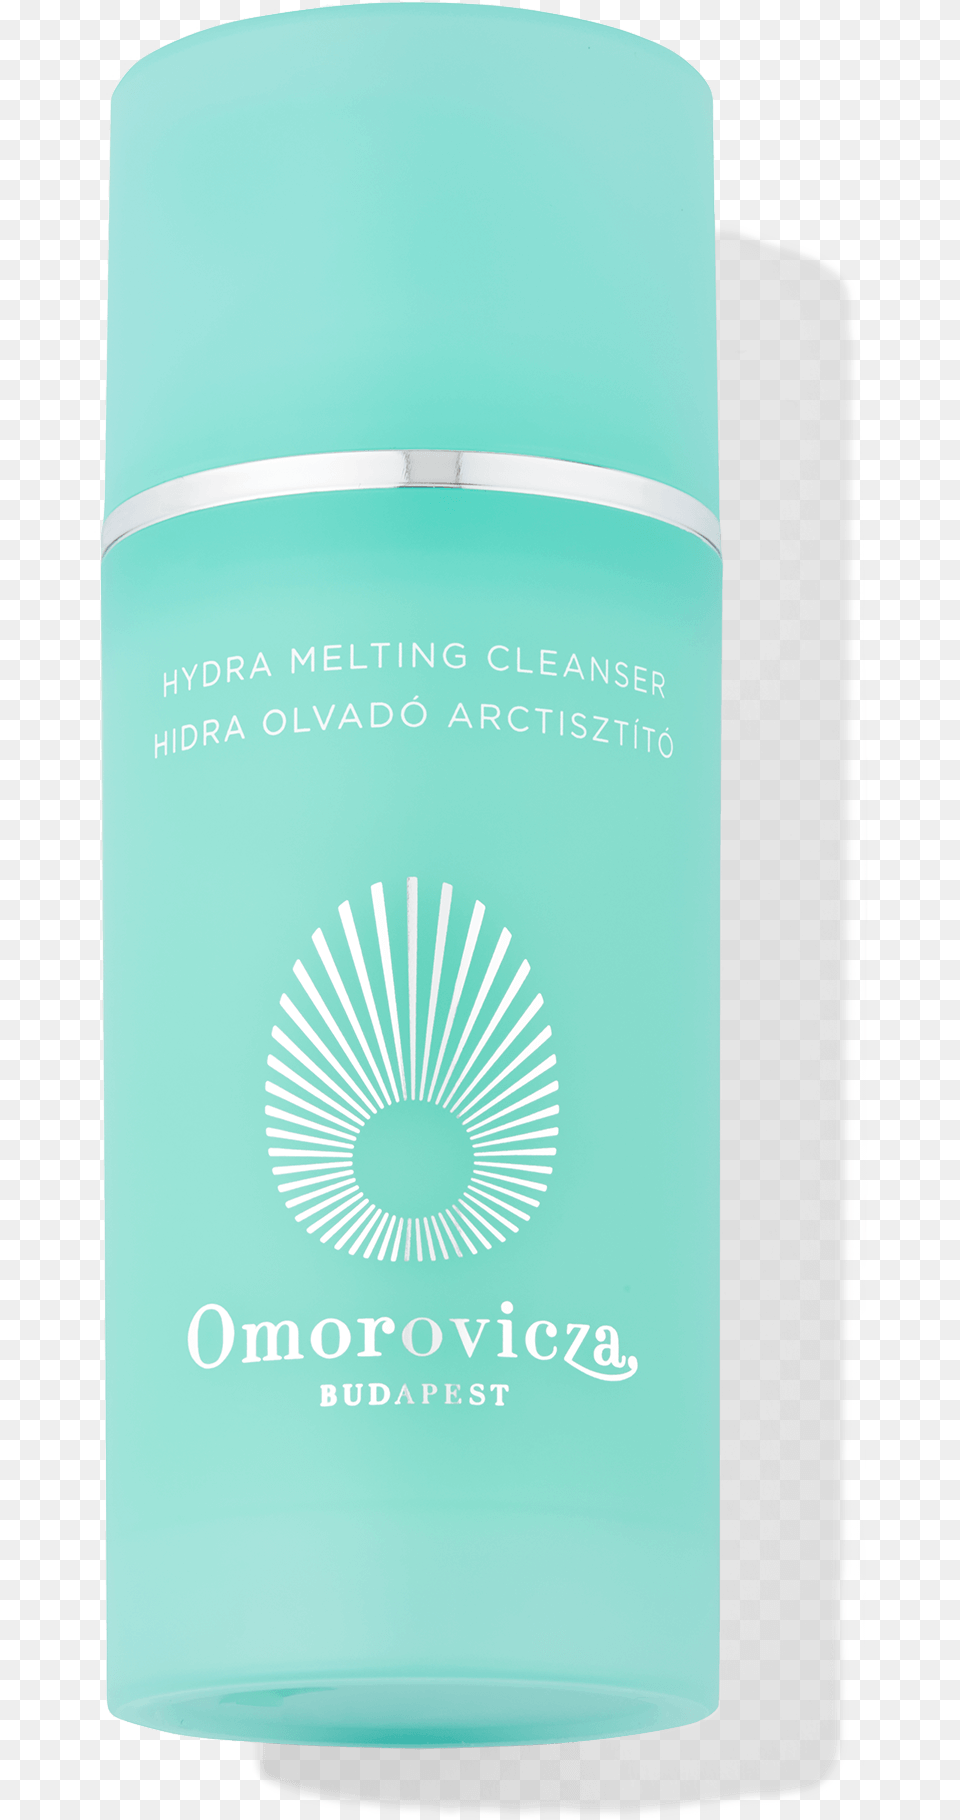 Hydra Melting Cleanser Bottle, Cosmetics, Deodorant Free Transparent Png